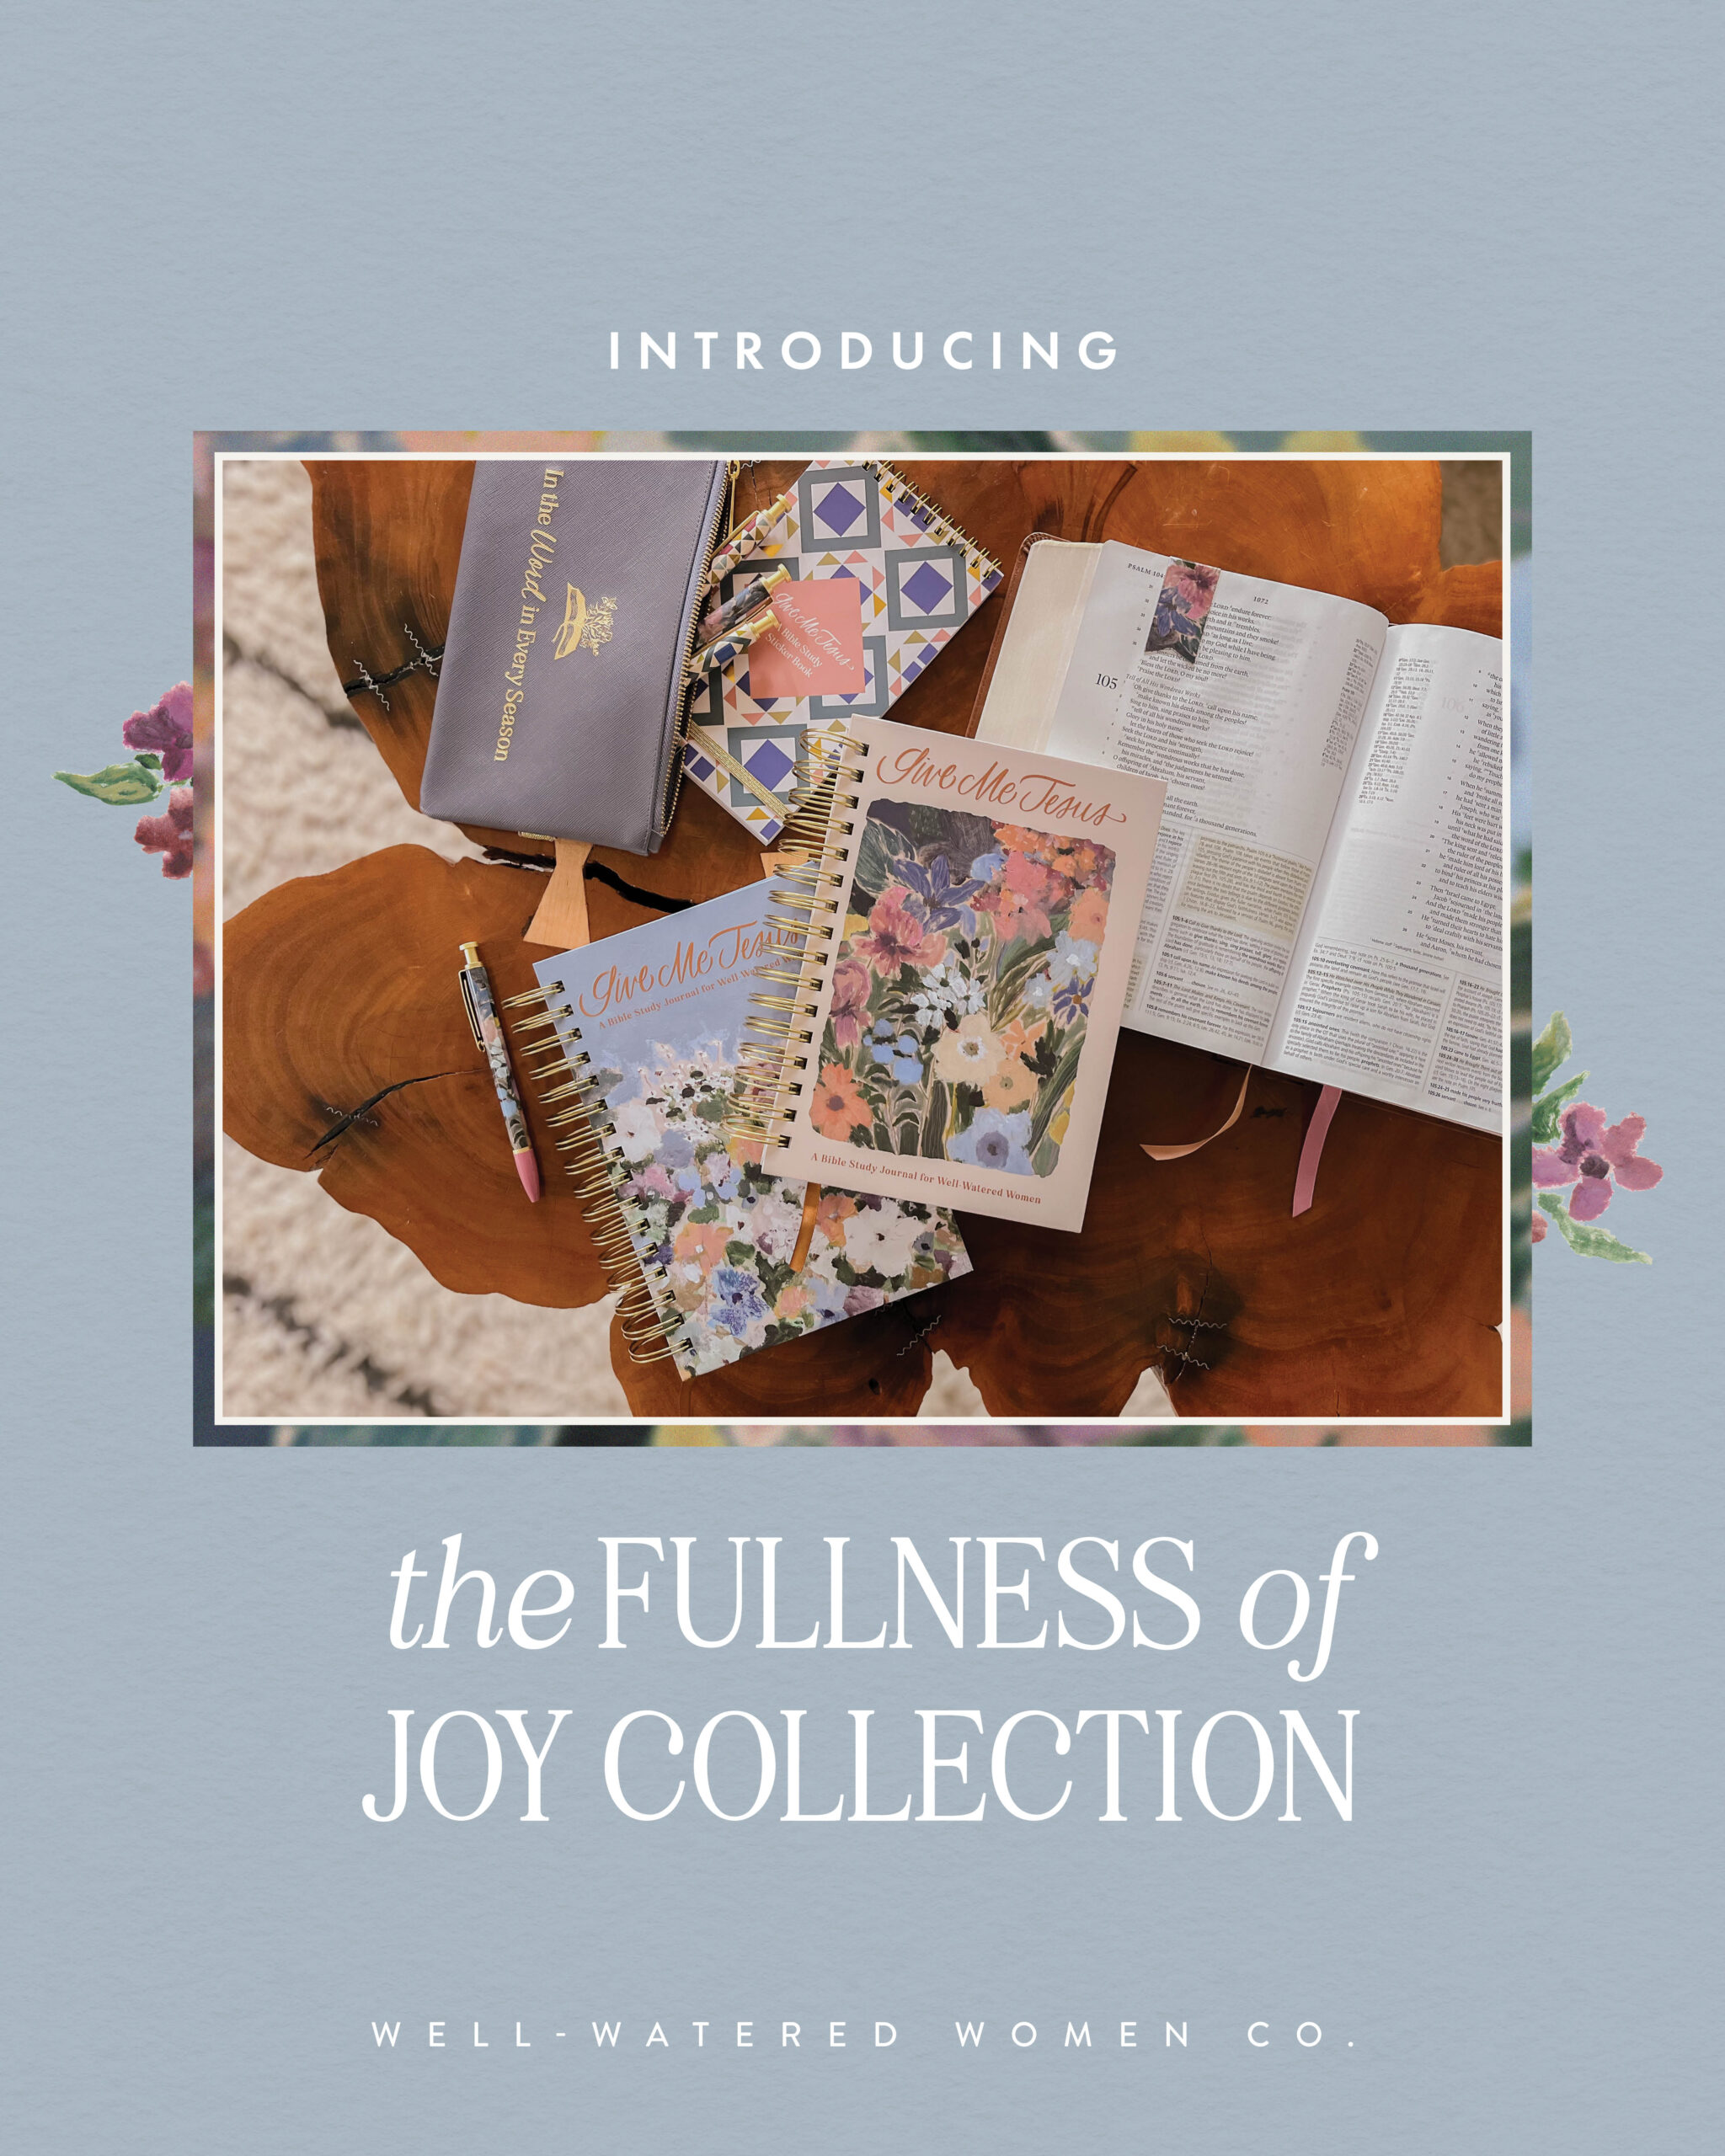 Introducing the Fullness of Joy Collection - an article from Well-Watered Women